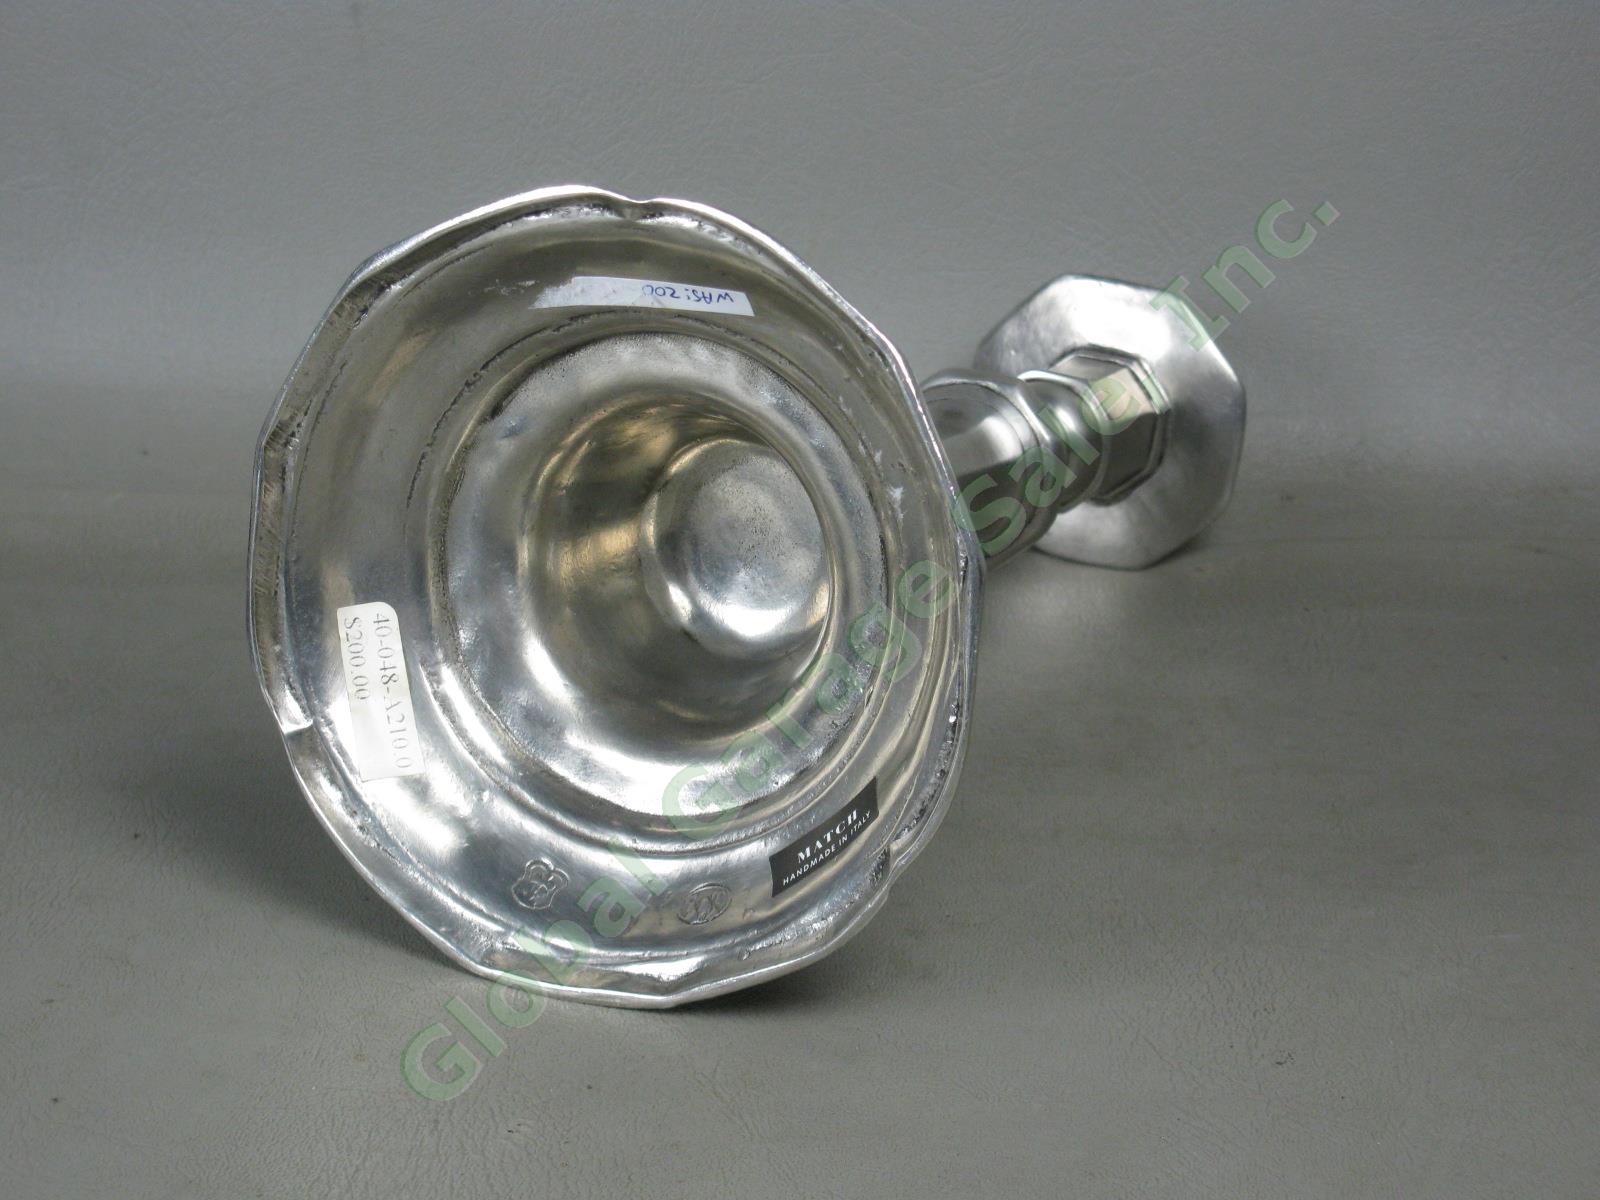 NEW Match Pewter Genoa Candlestick 9.75" Made In Italy $220 Retail No Reserve! 5